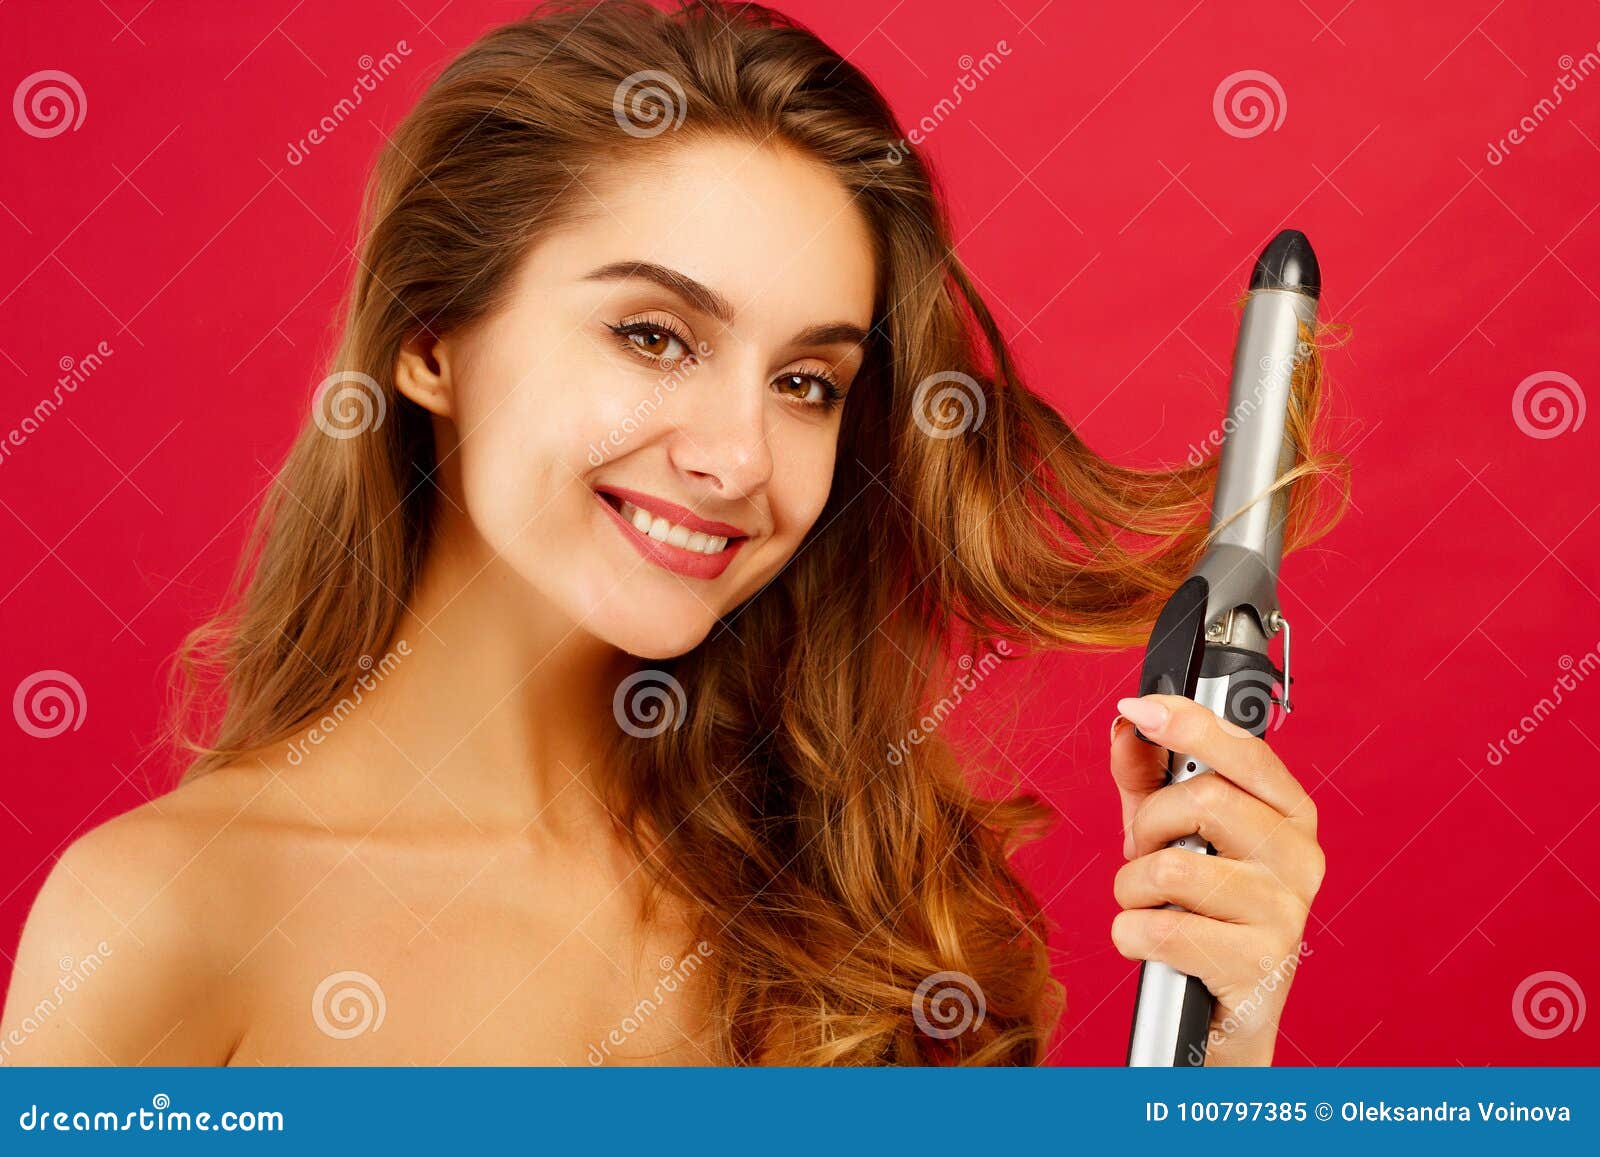 young smiley woman making curly hair by ploy over red background